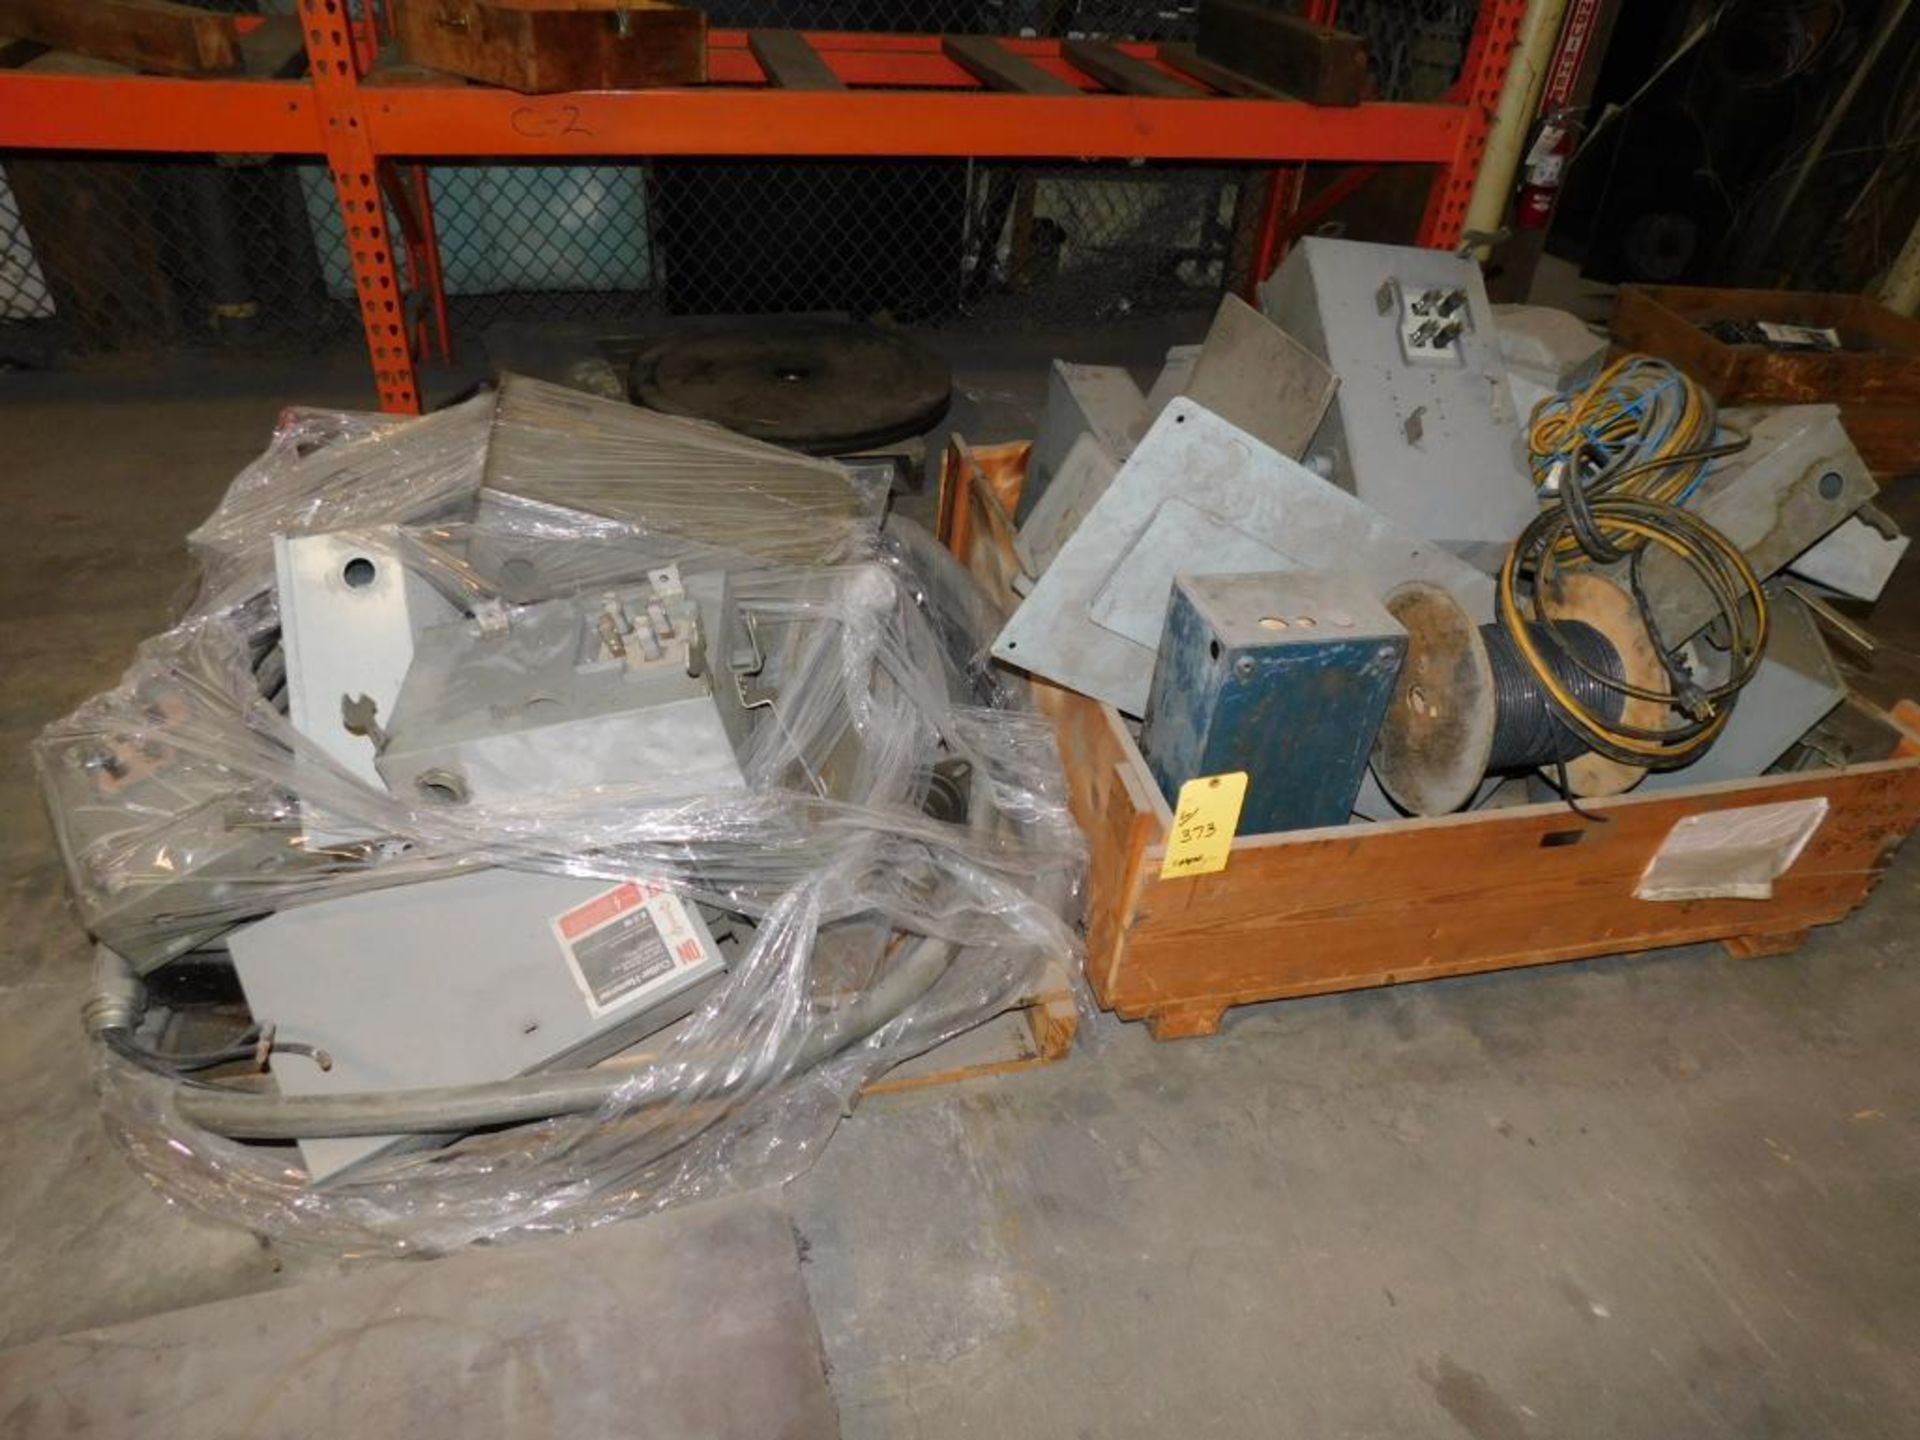 LOT: Contents of Maintenance Room: Fuse Boxes, Wire, Assorted Belts, Spare Machine Parts, - Image 11 of 13